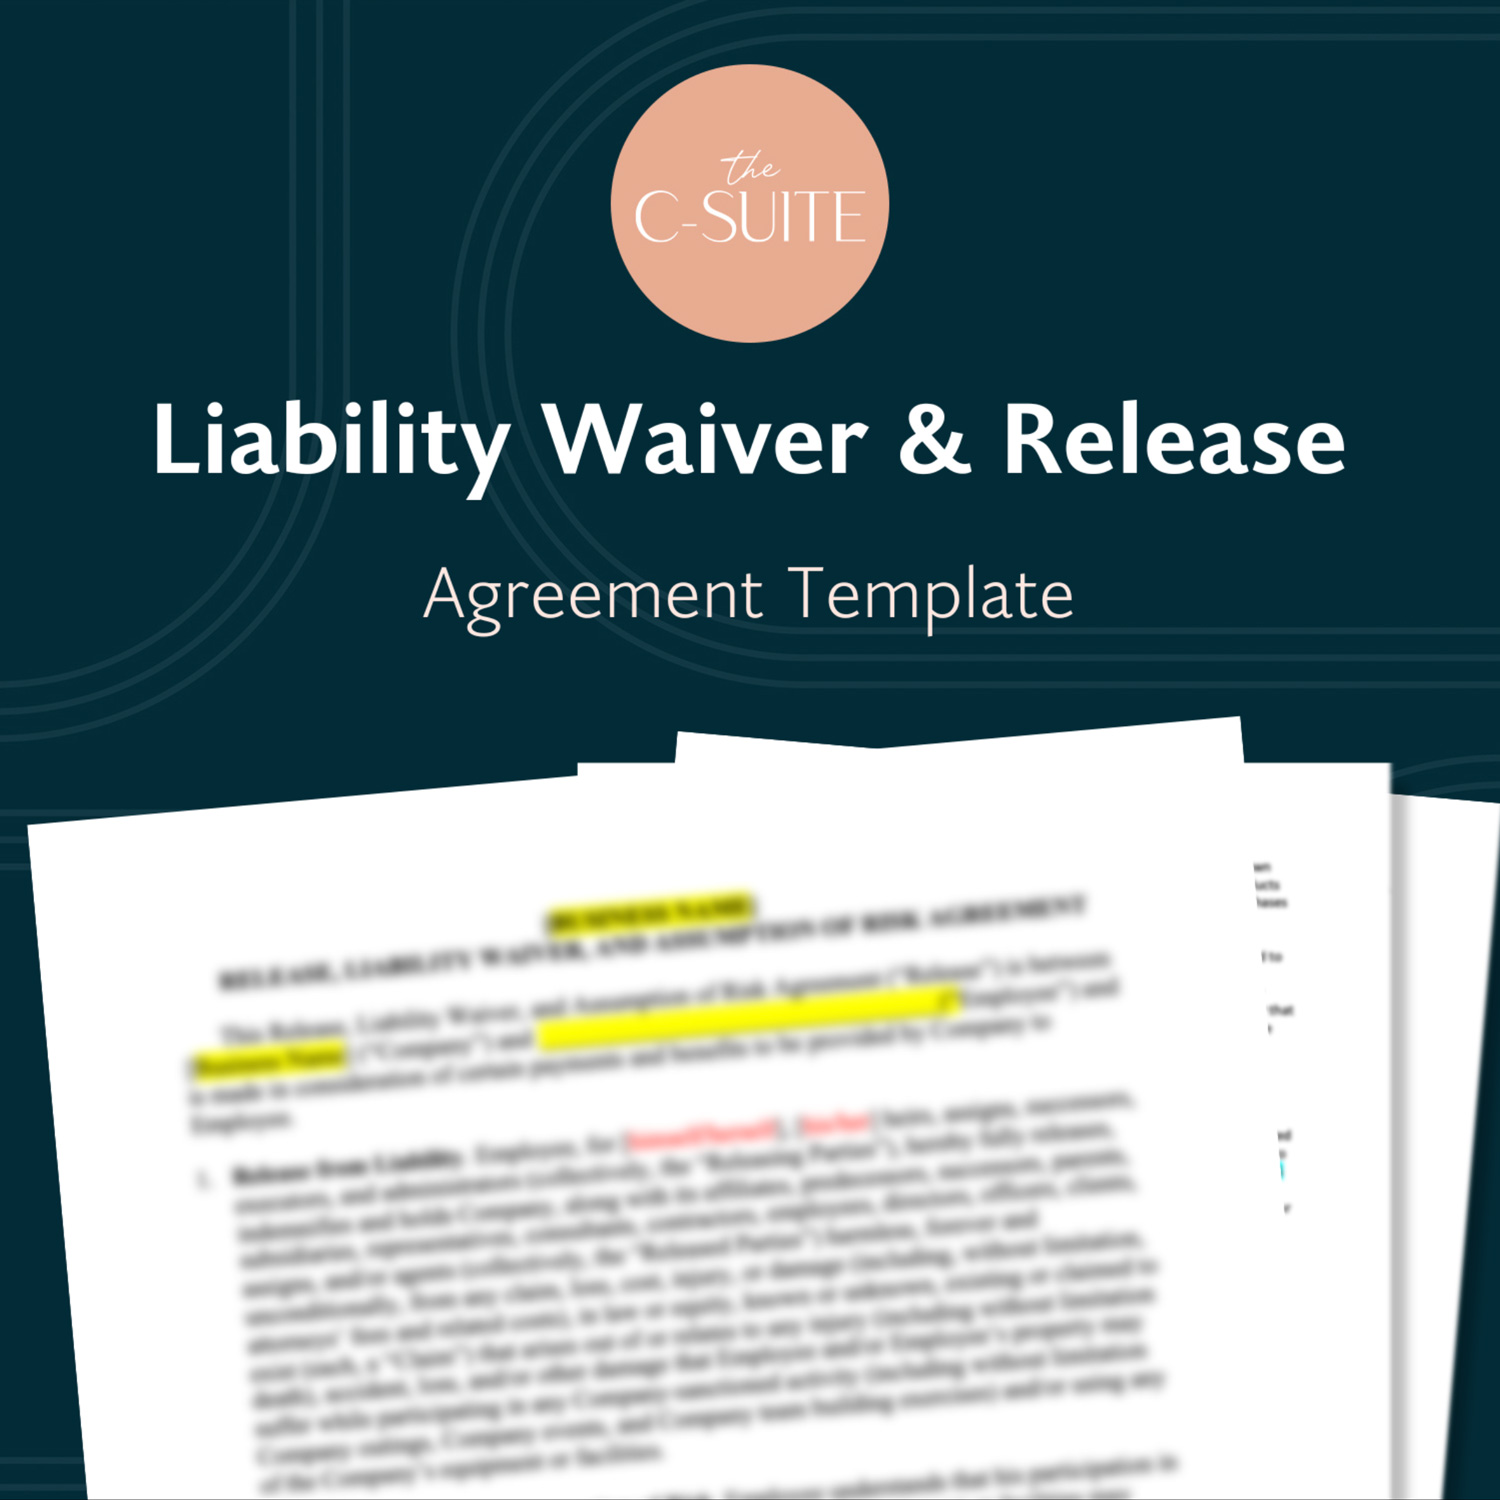 Liability Waiver & Release Agreement Template